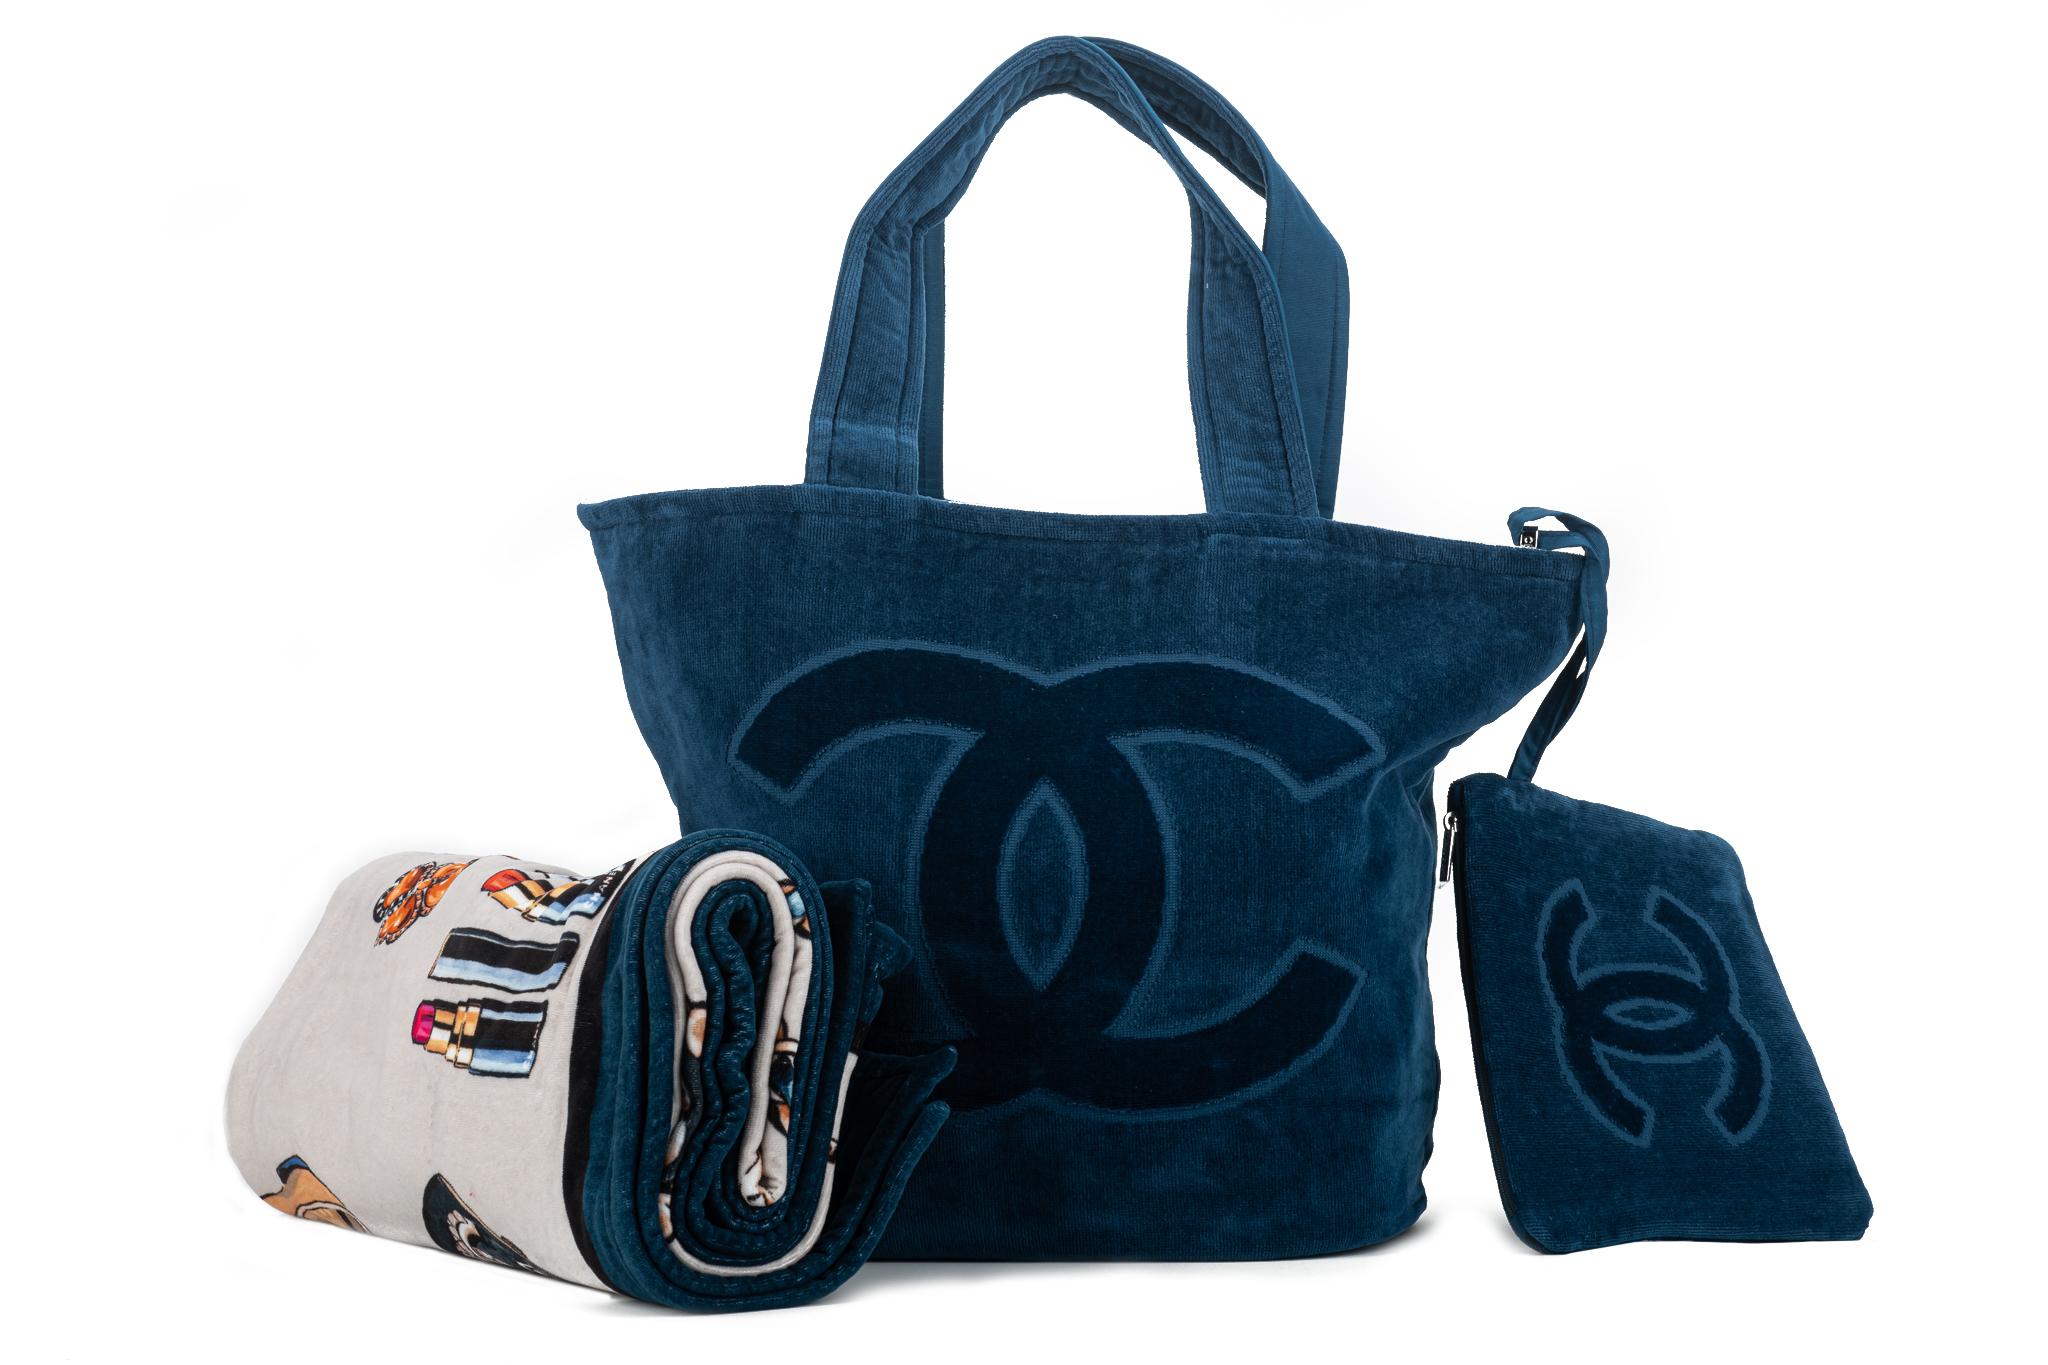 New Chanel Blue Beach Bag Towel Set Iconic Design For Sale 3